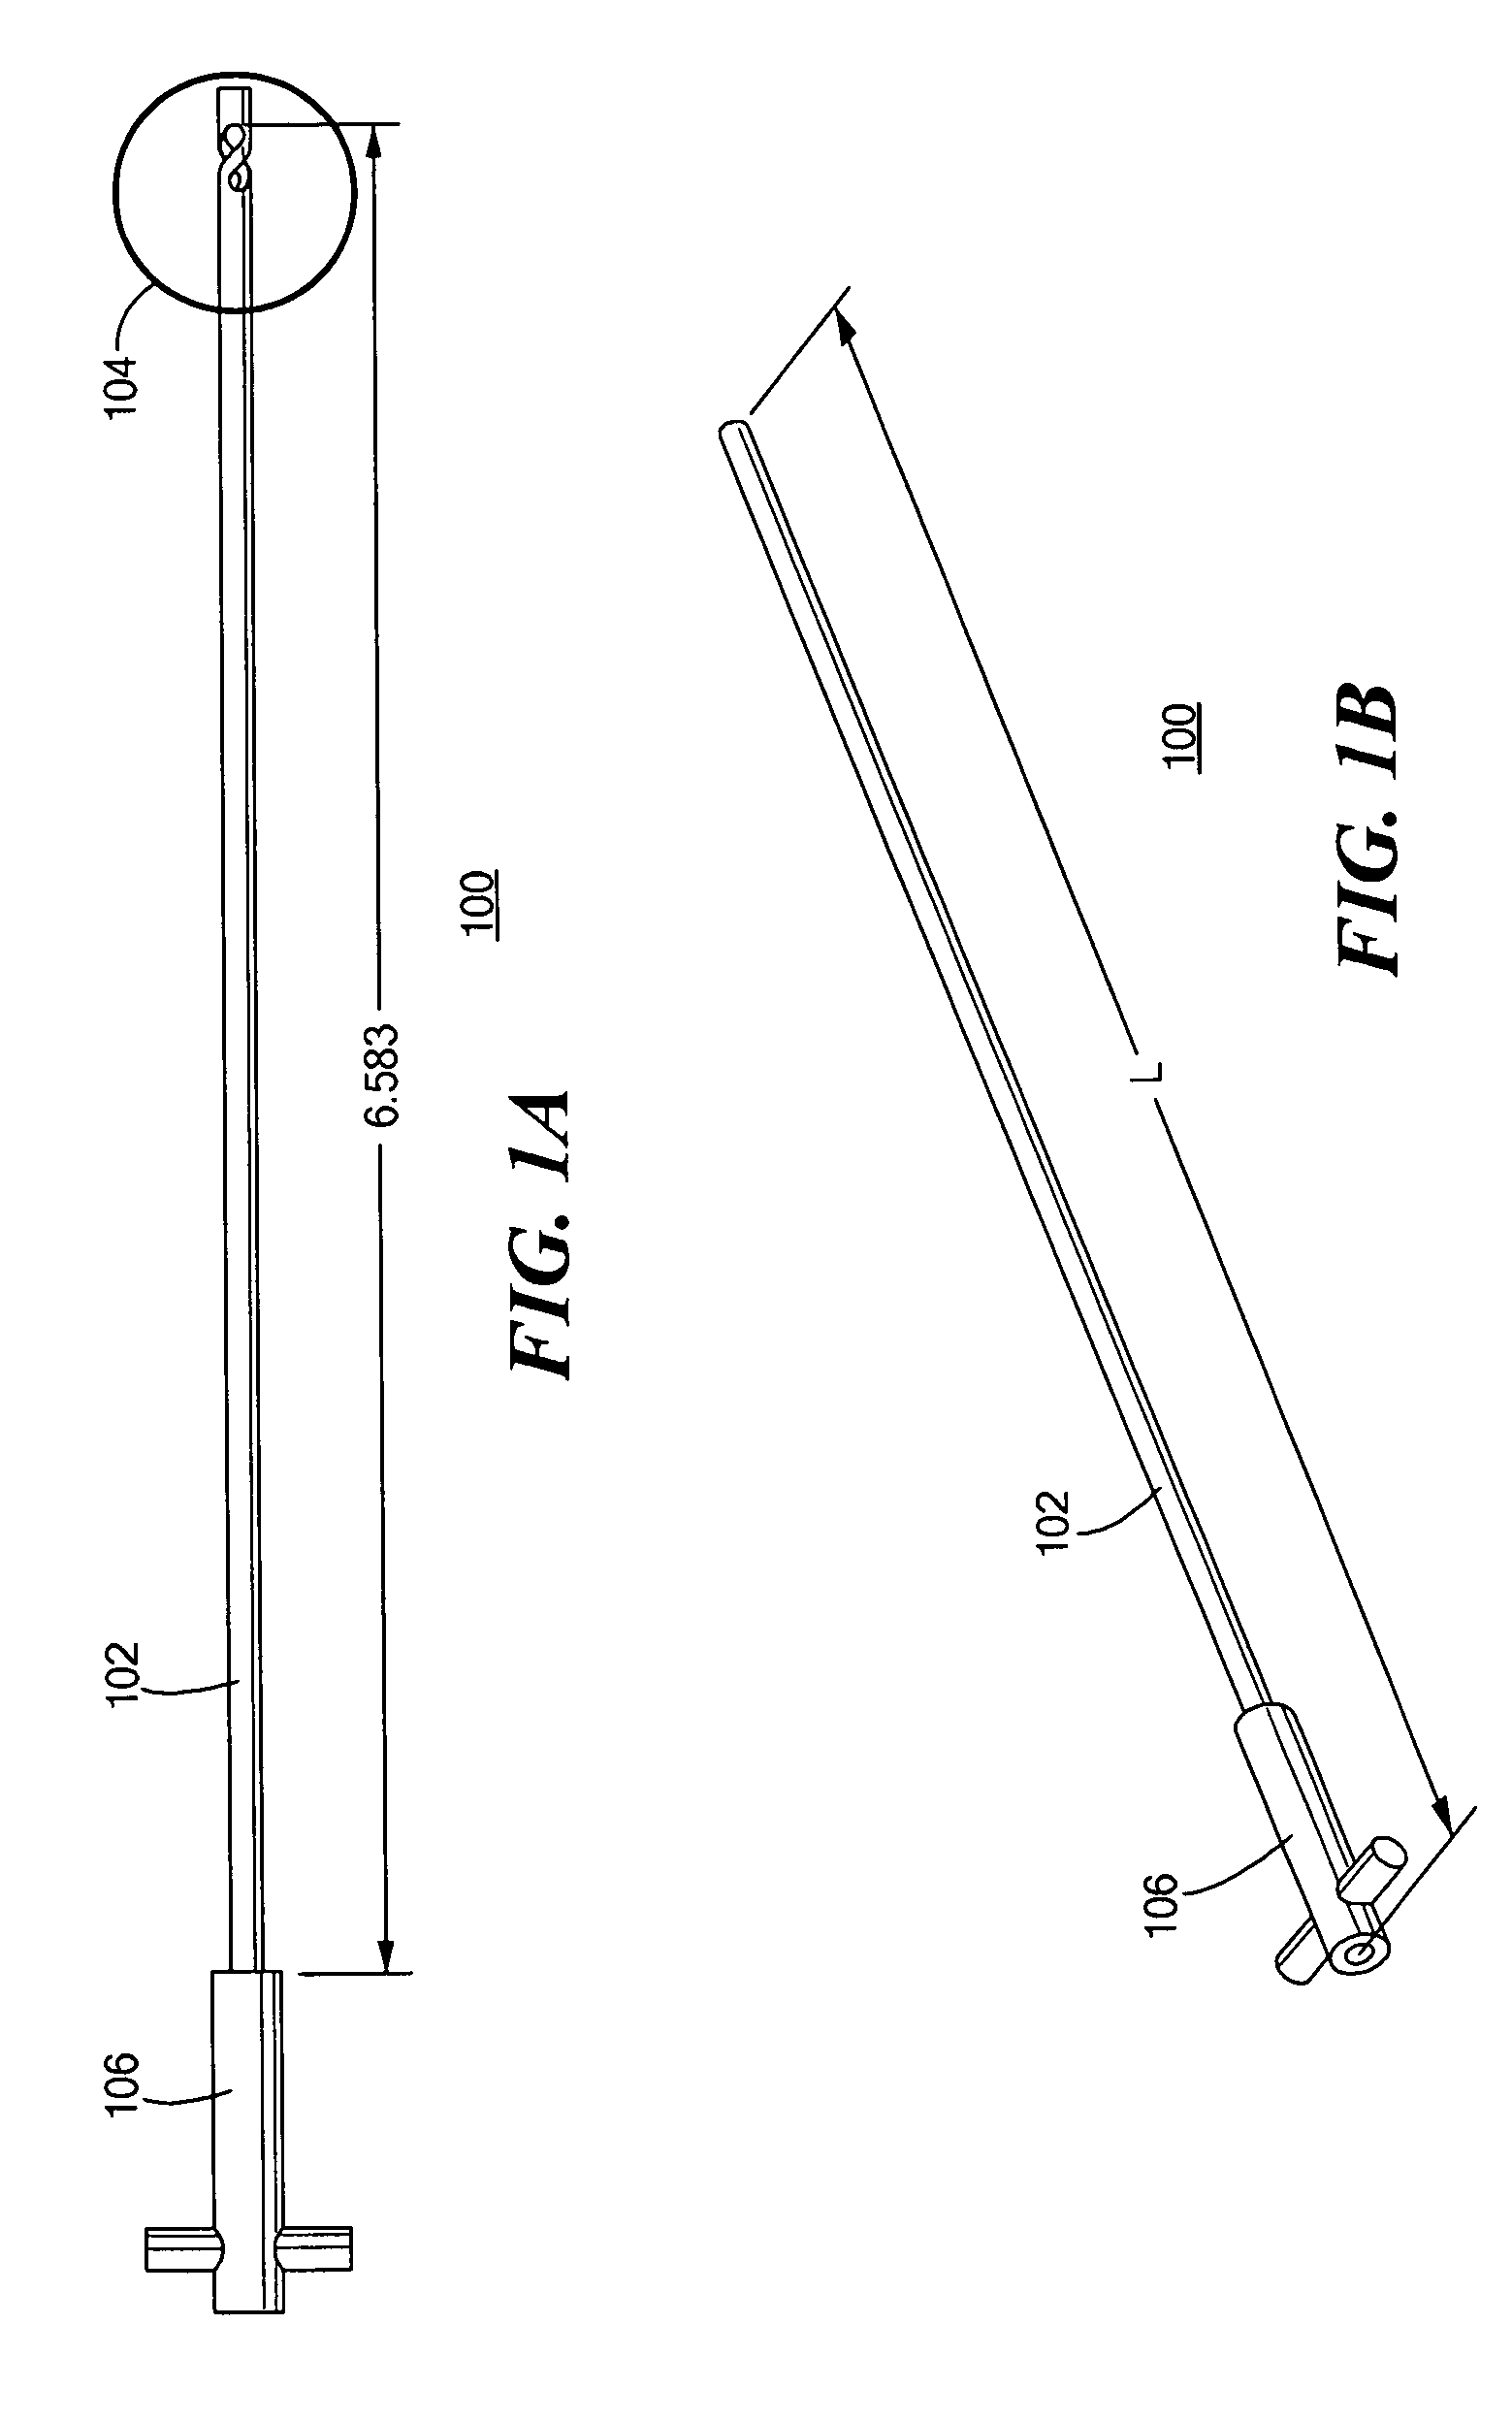 Tissue sample needle and method of using same